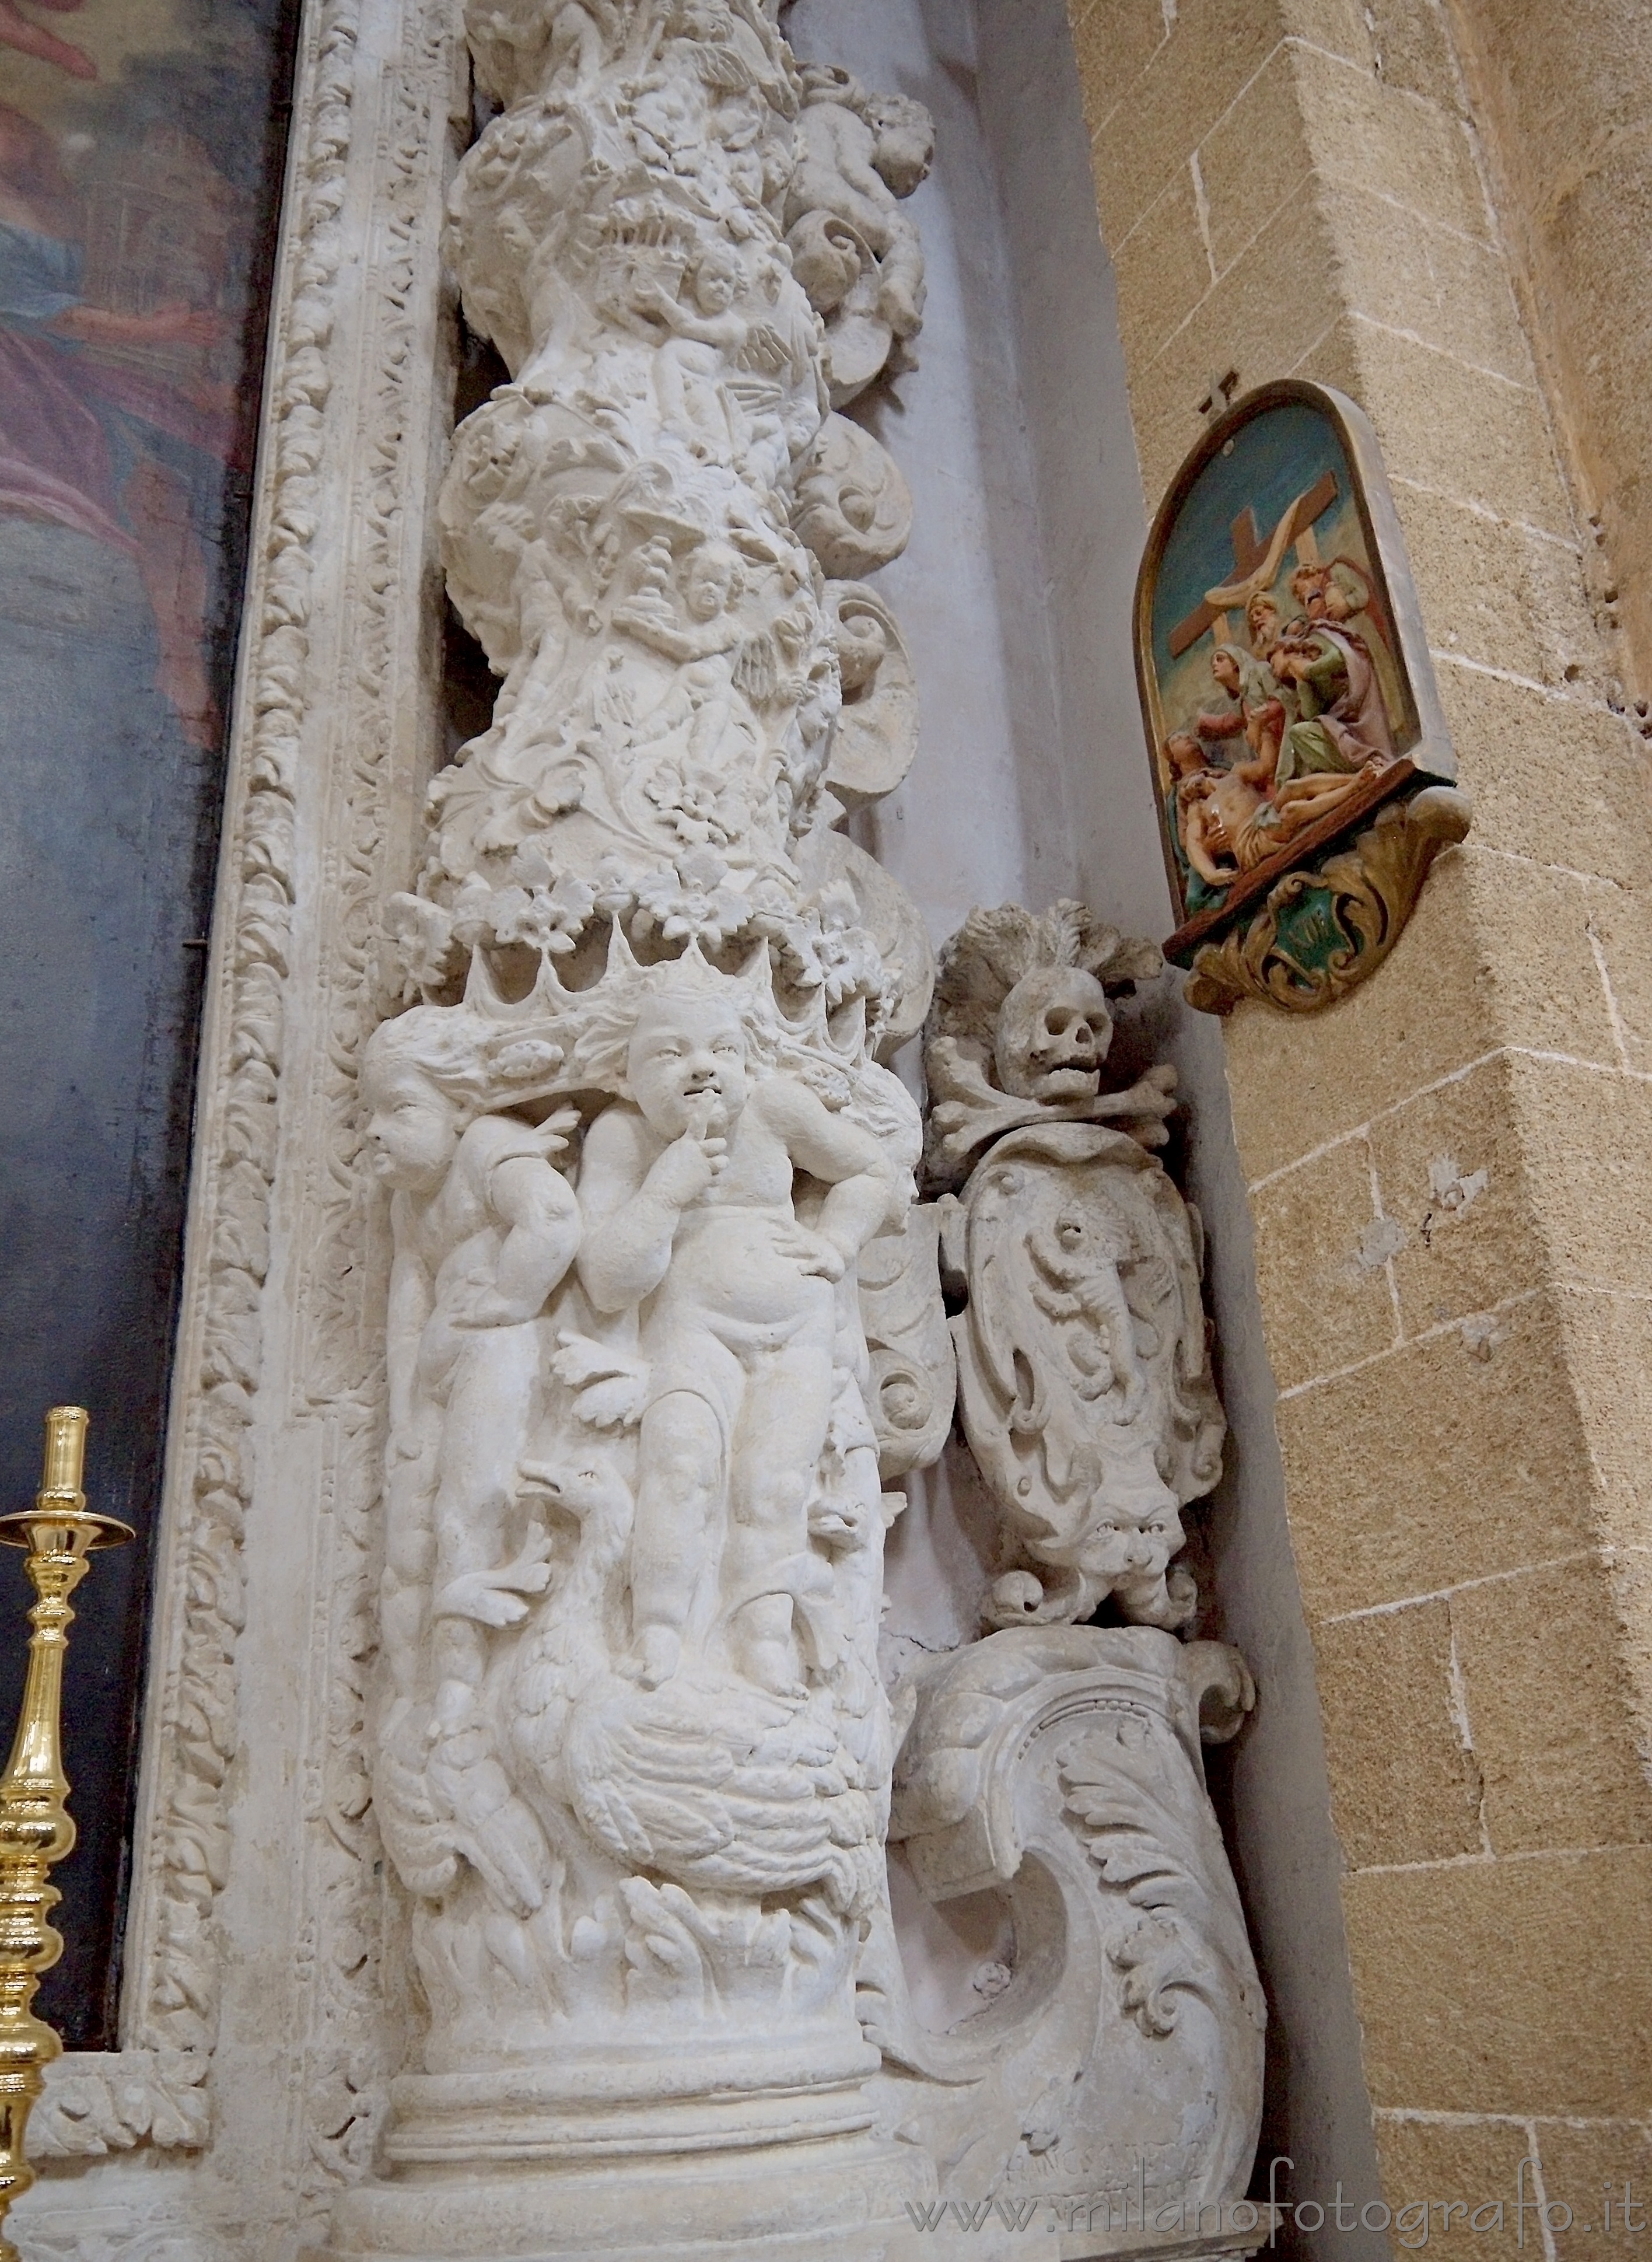 Gallipoli (Lecce, Italy): Detail of the decorations inside the Duomo - Gallipoli (Lecce, Italy)